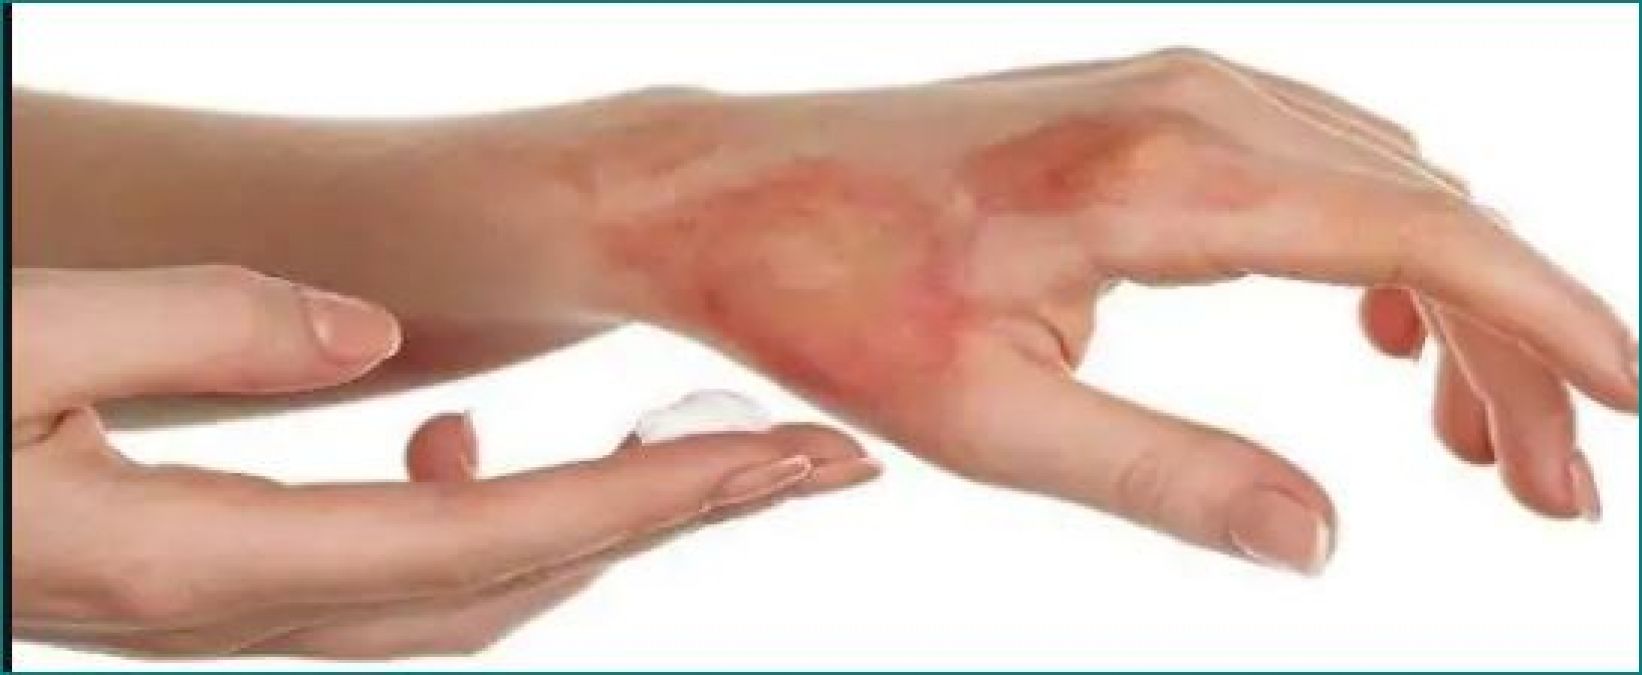 Know how to get rid of these burn marks